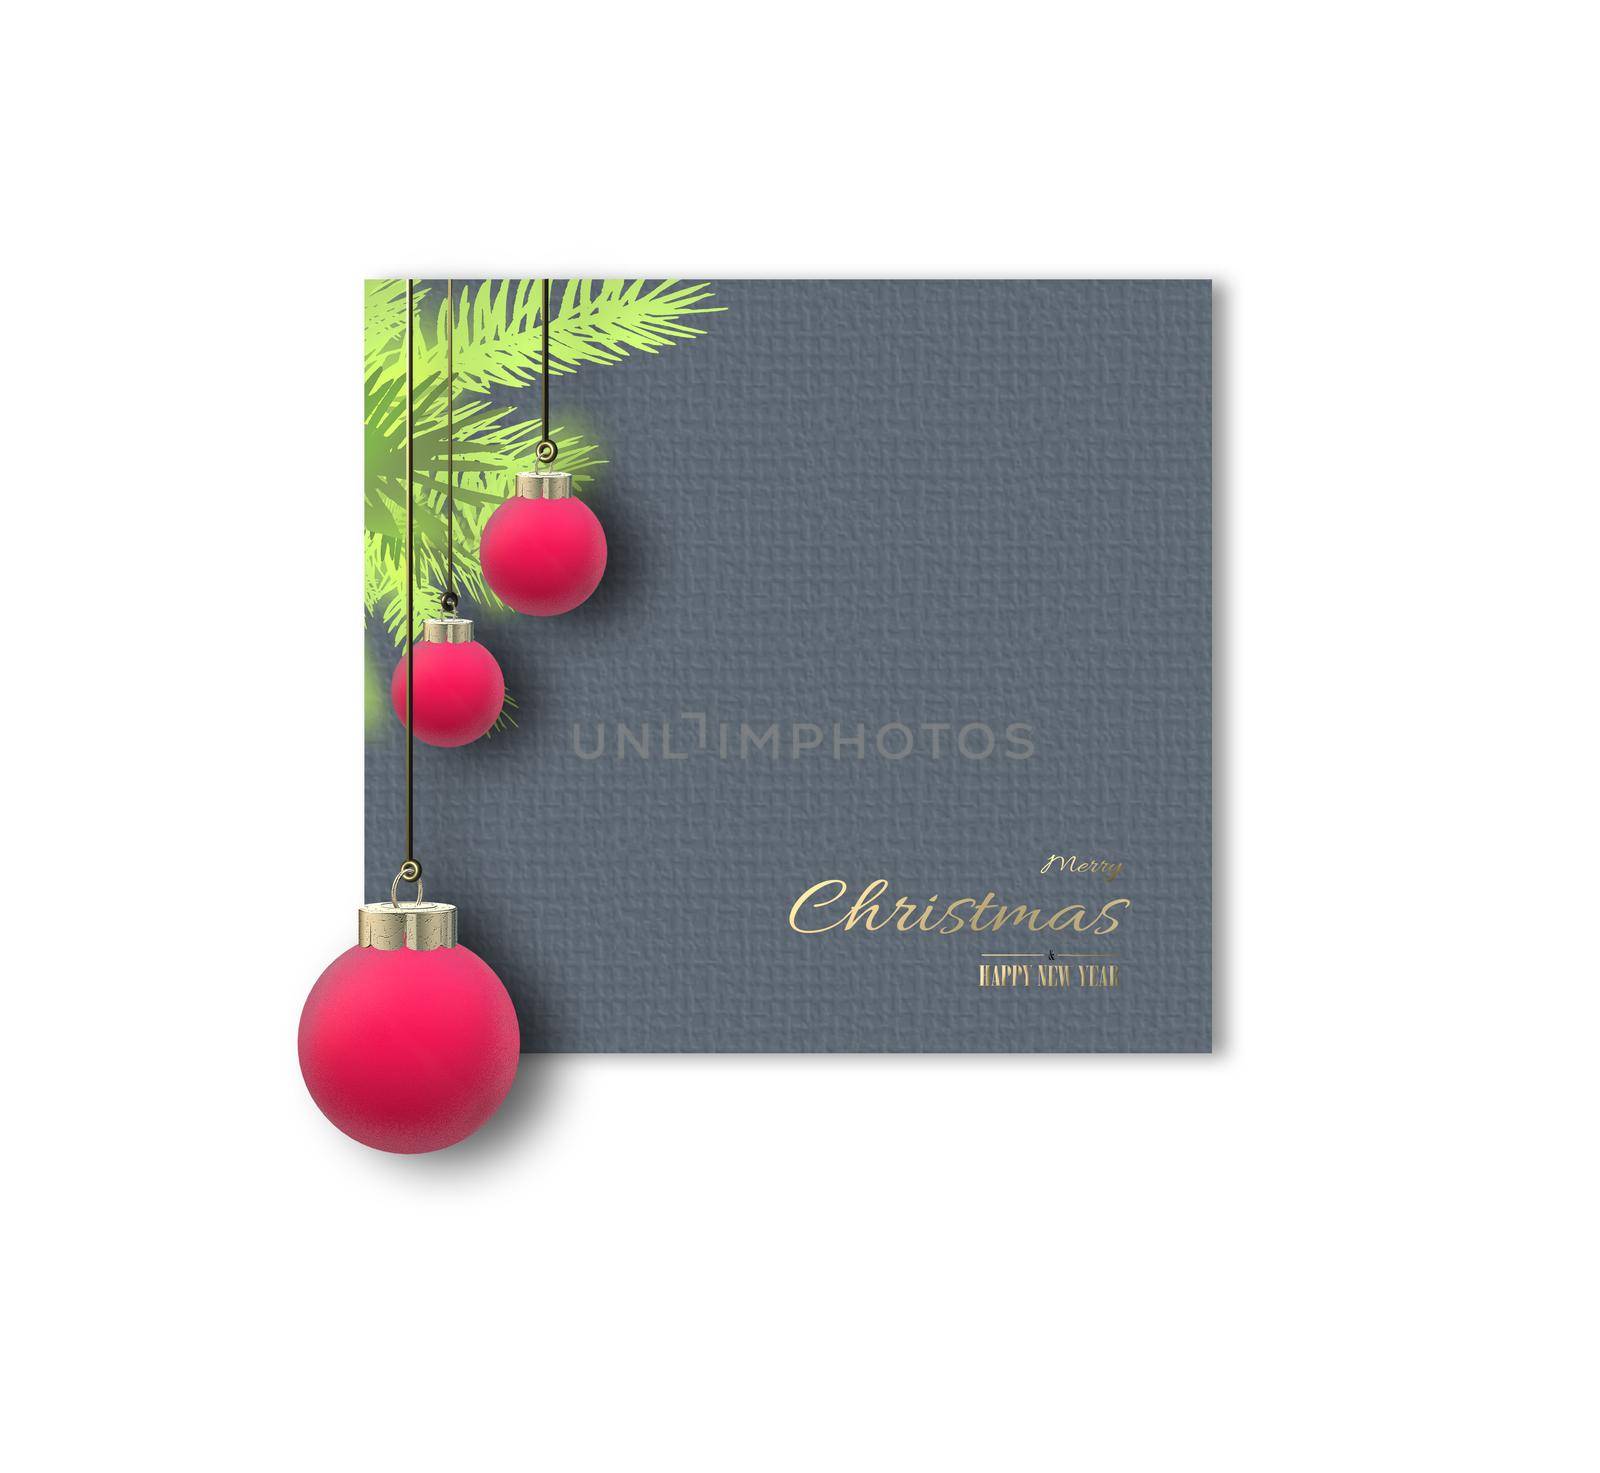 Contemporary modern abstract Christmas card by NelliPolk